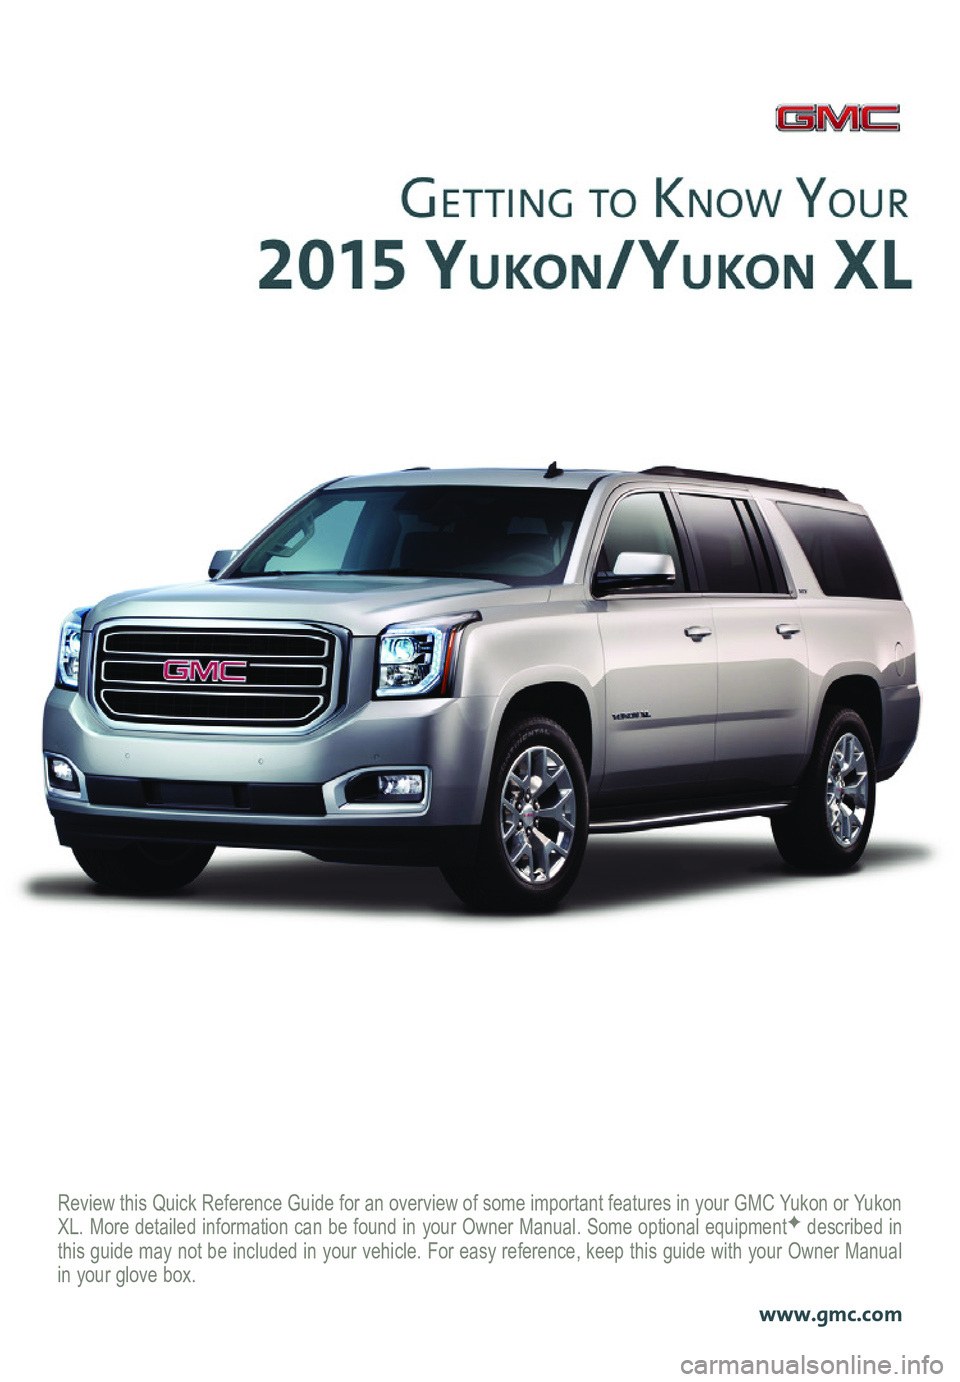 GMC YUKON 2015  Get To Know Guide Review this Quick Reference Guide for an overview of some important feat\
ures in your GMC Yukon or Yukon XL. More detailed information can be found in your Owner Manual. Some op\
tional equipmentF de